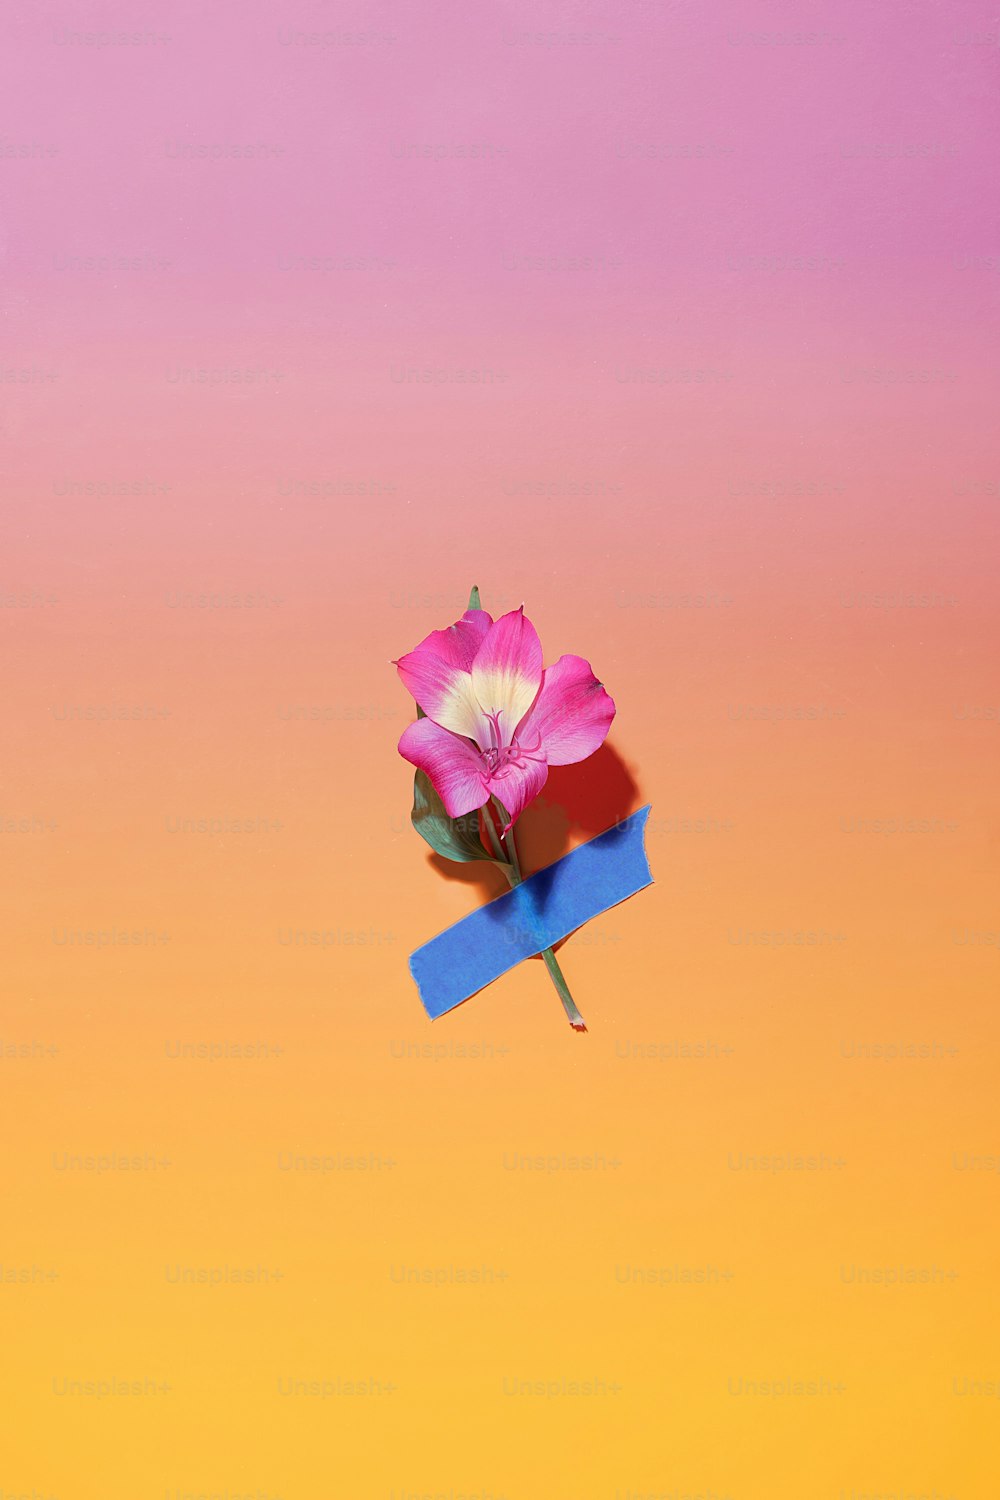 a single pink flower on top of a blue ribbon